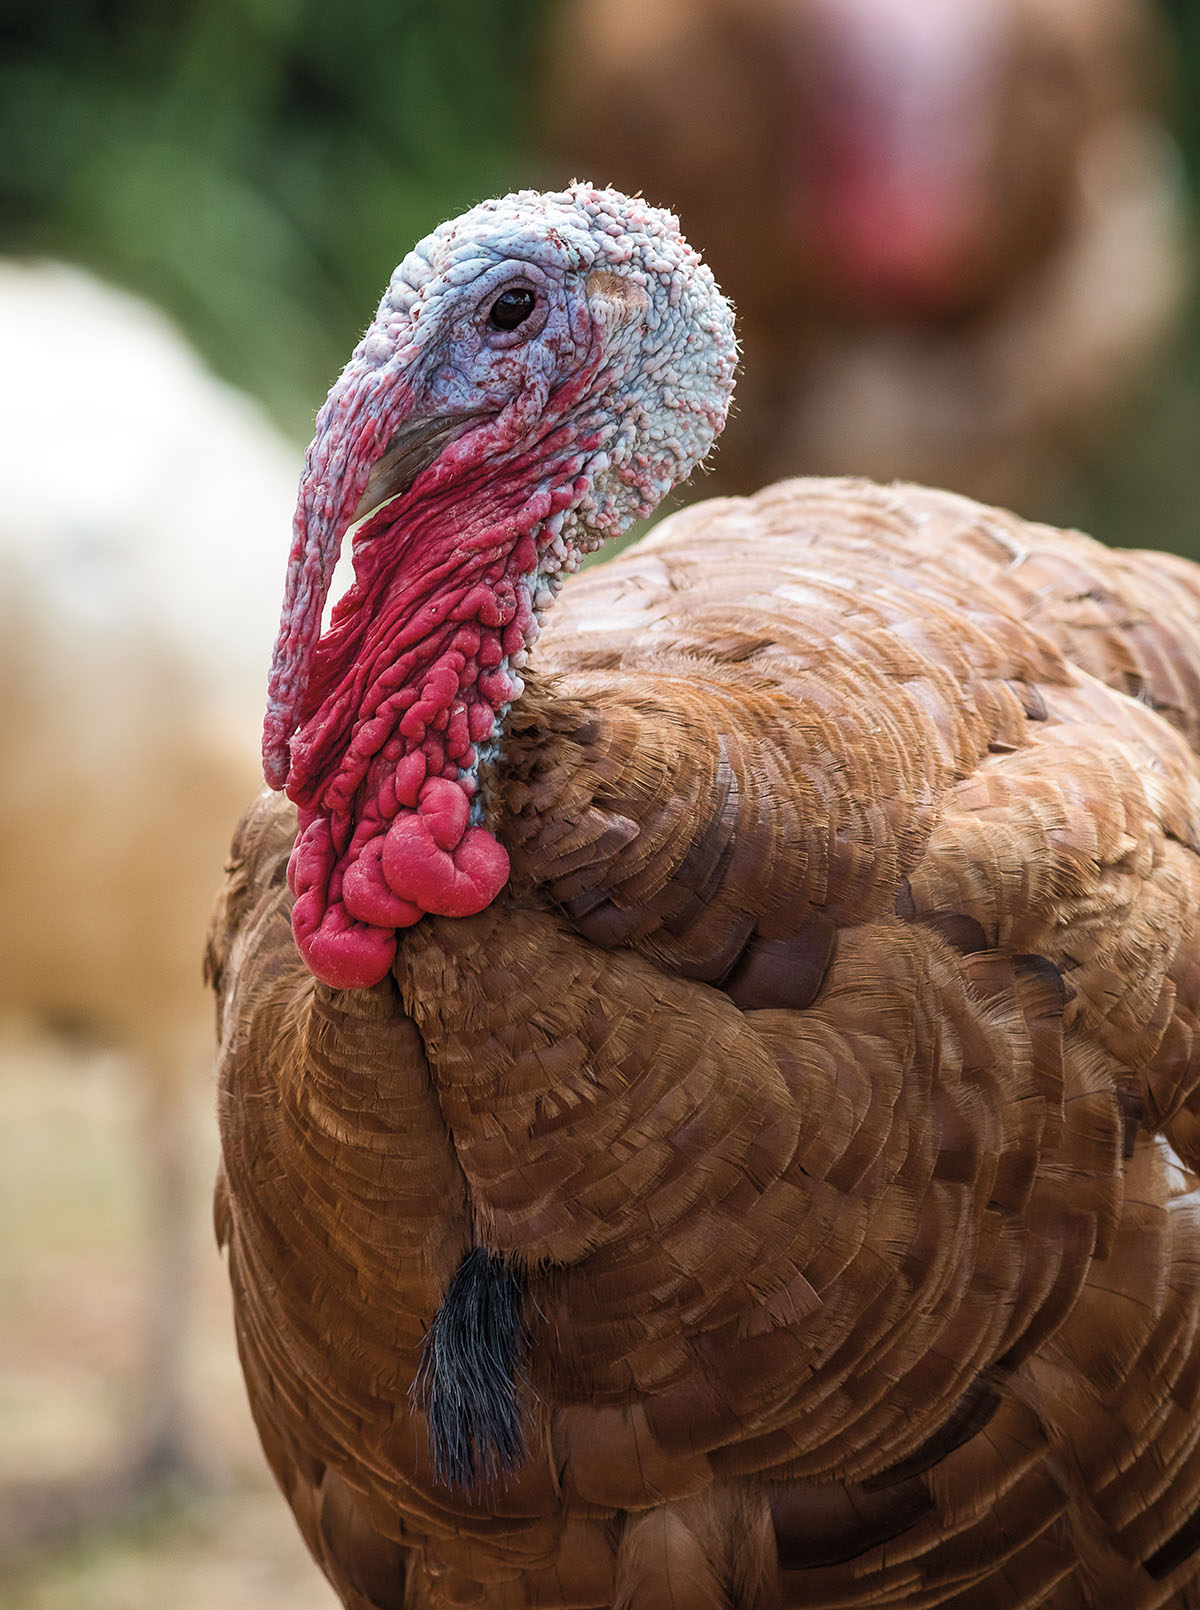 A large heritage turkey looks away from the camera